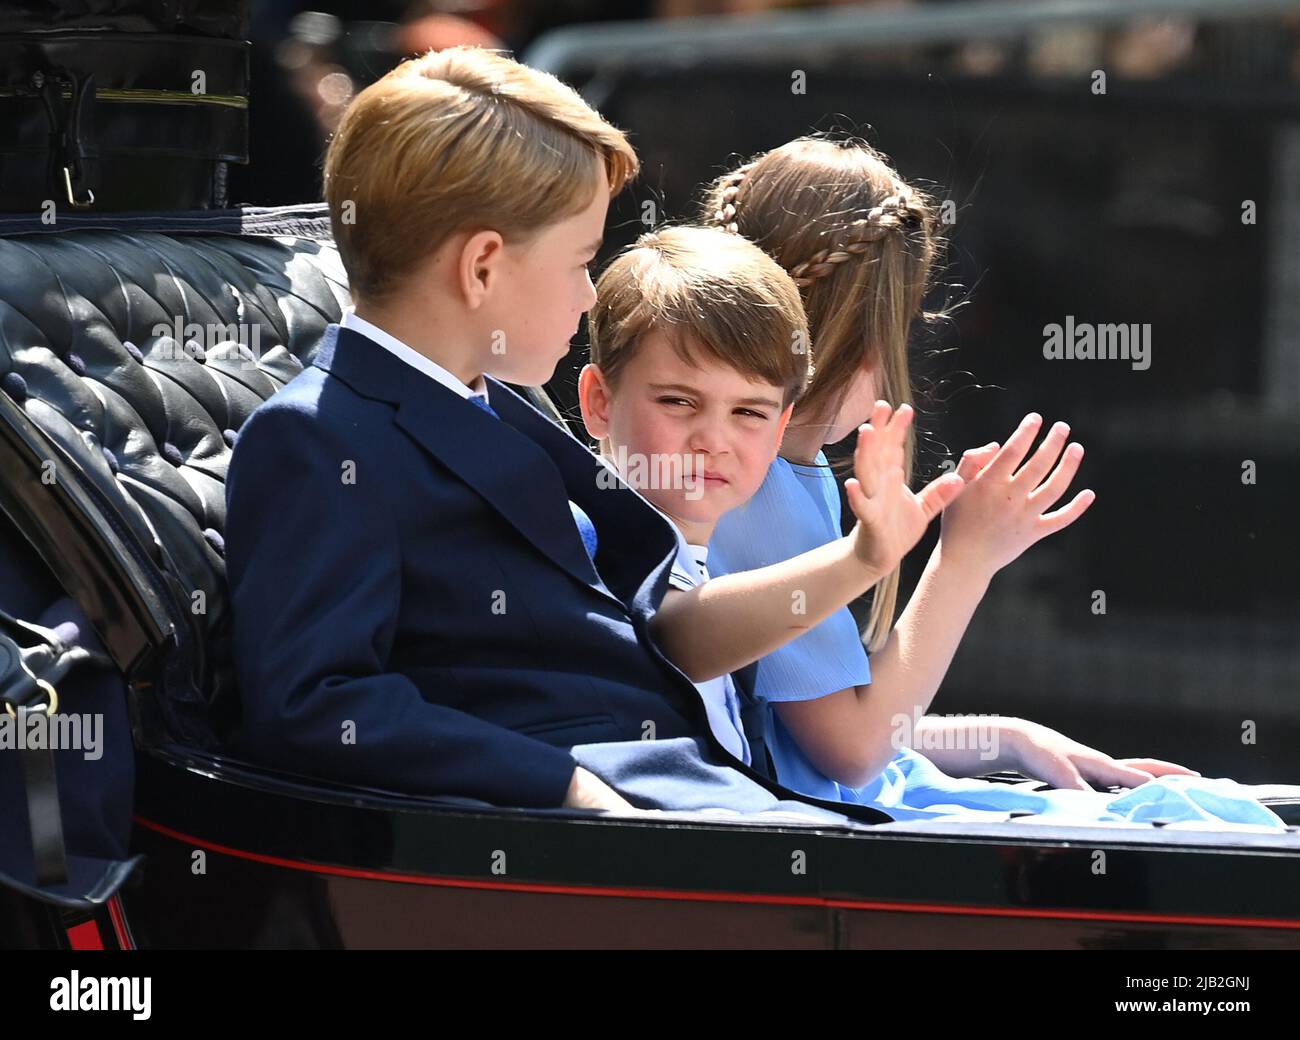 June 2nd, 2022. London, UK. The Duchess of Cambridge, The Duchess of Cornwall, Prince George, Princess Charlotte, Prince Louis riding in a carriage during Trooping the Colour, part of the Platinum Jubilee celebrations. Credit: Doug Peters/EMPICS/Alamy Live News Stock Photo